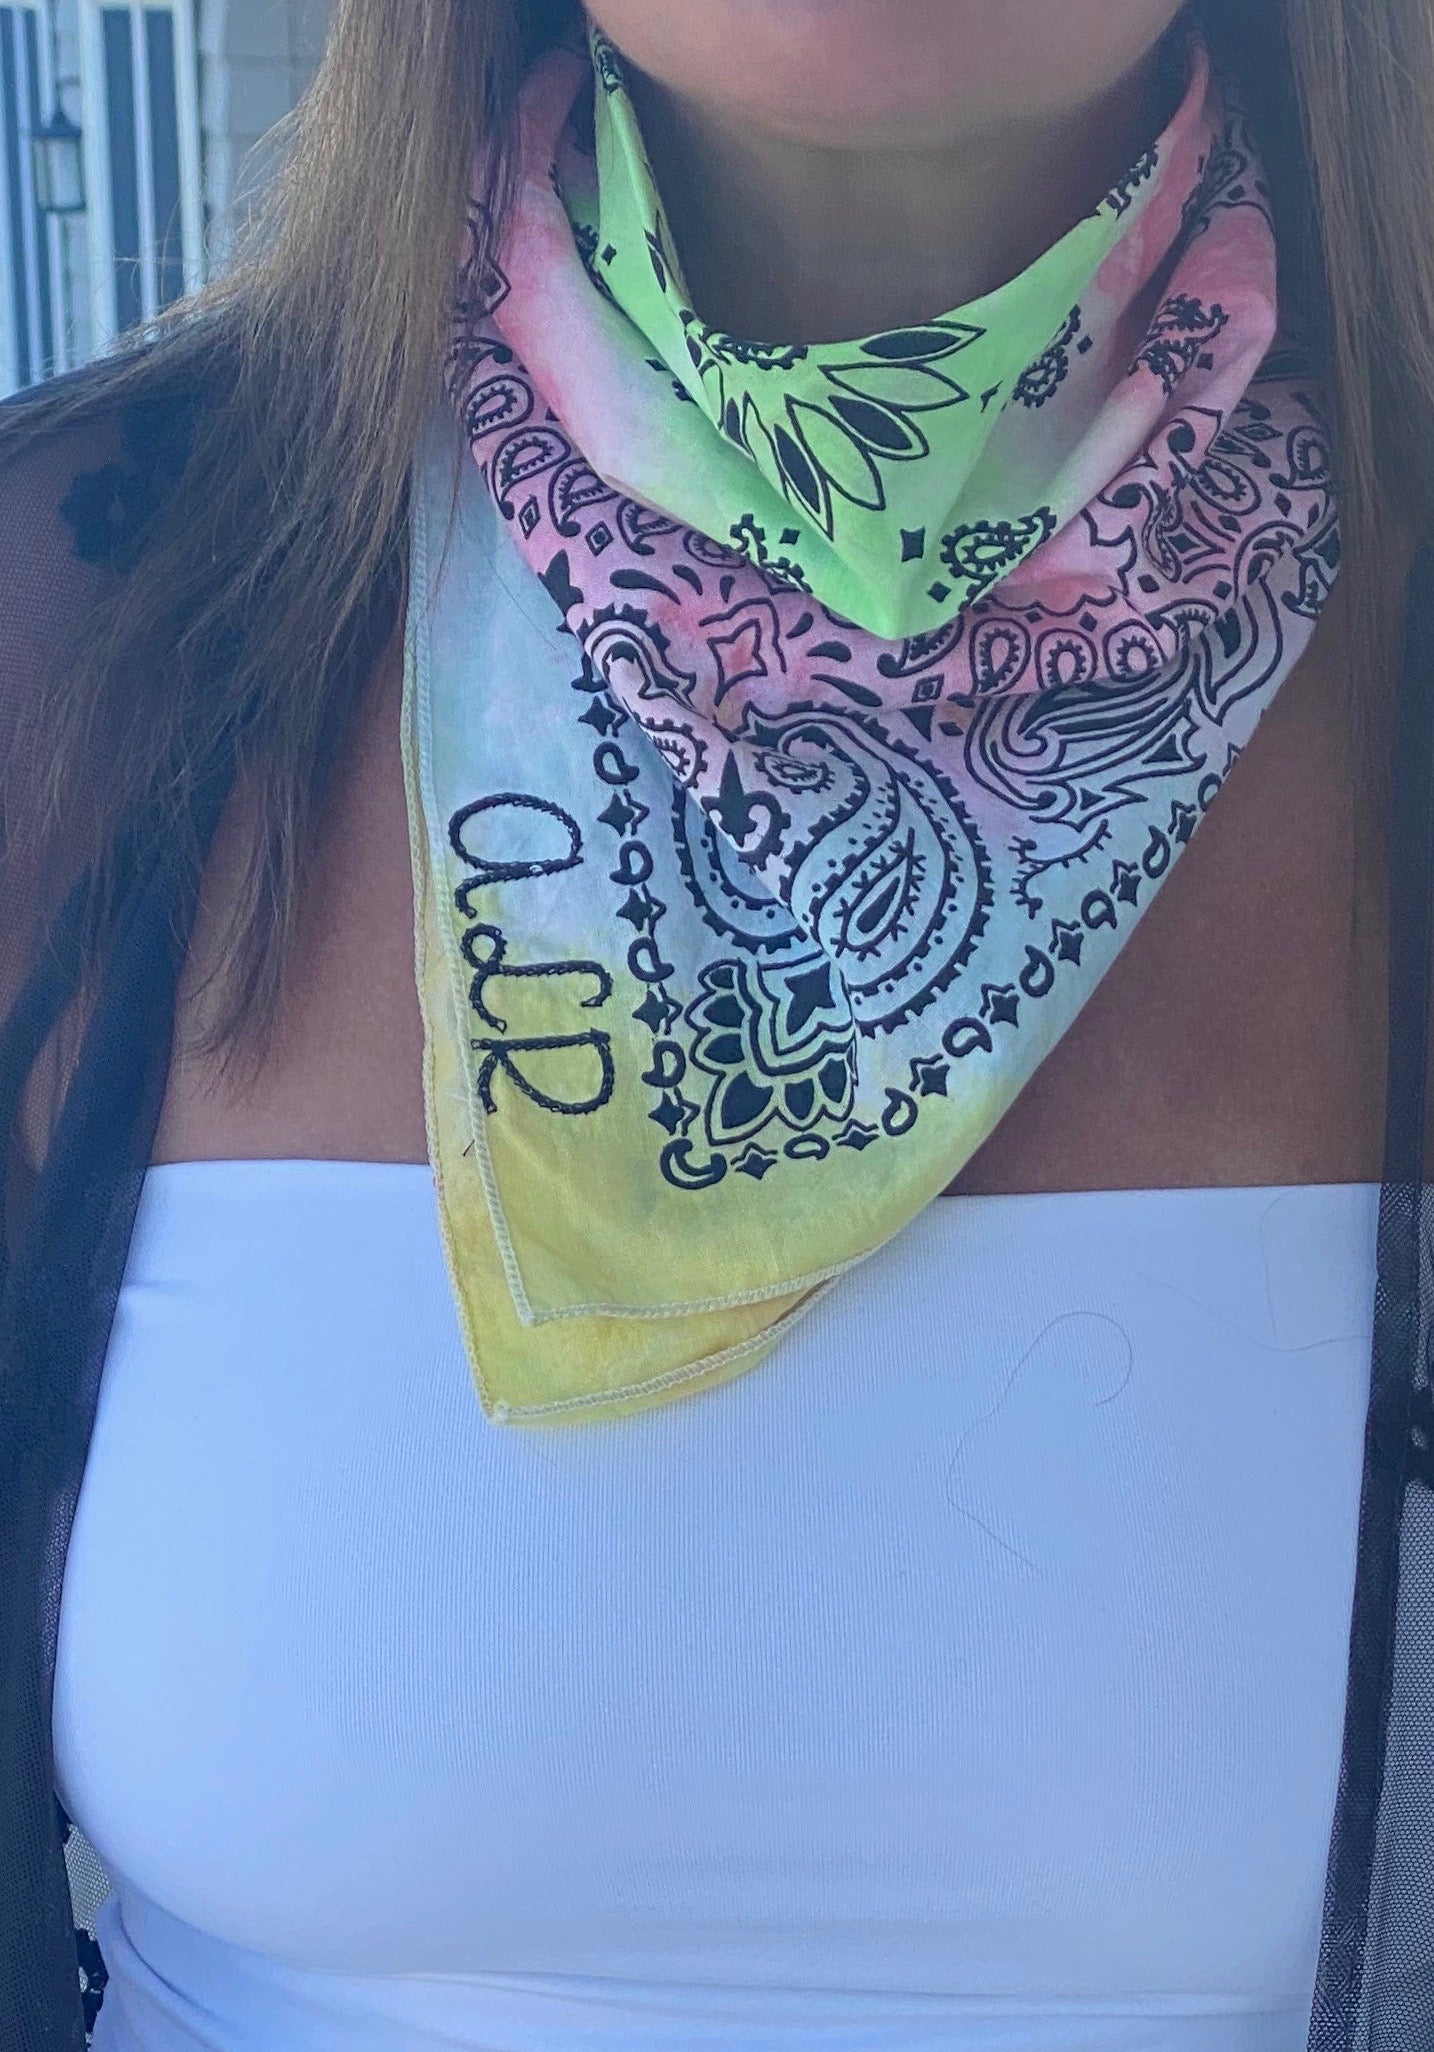 Personalized Bandana and Face Covering